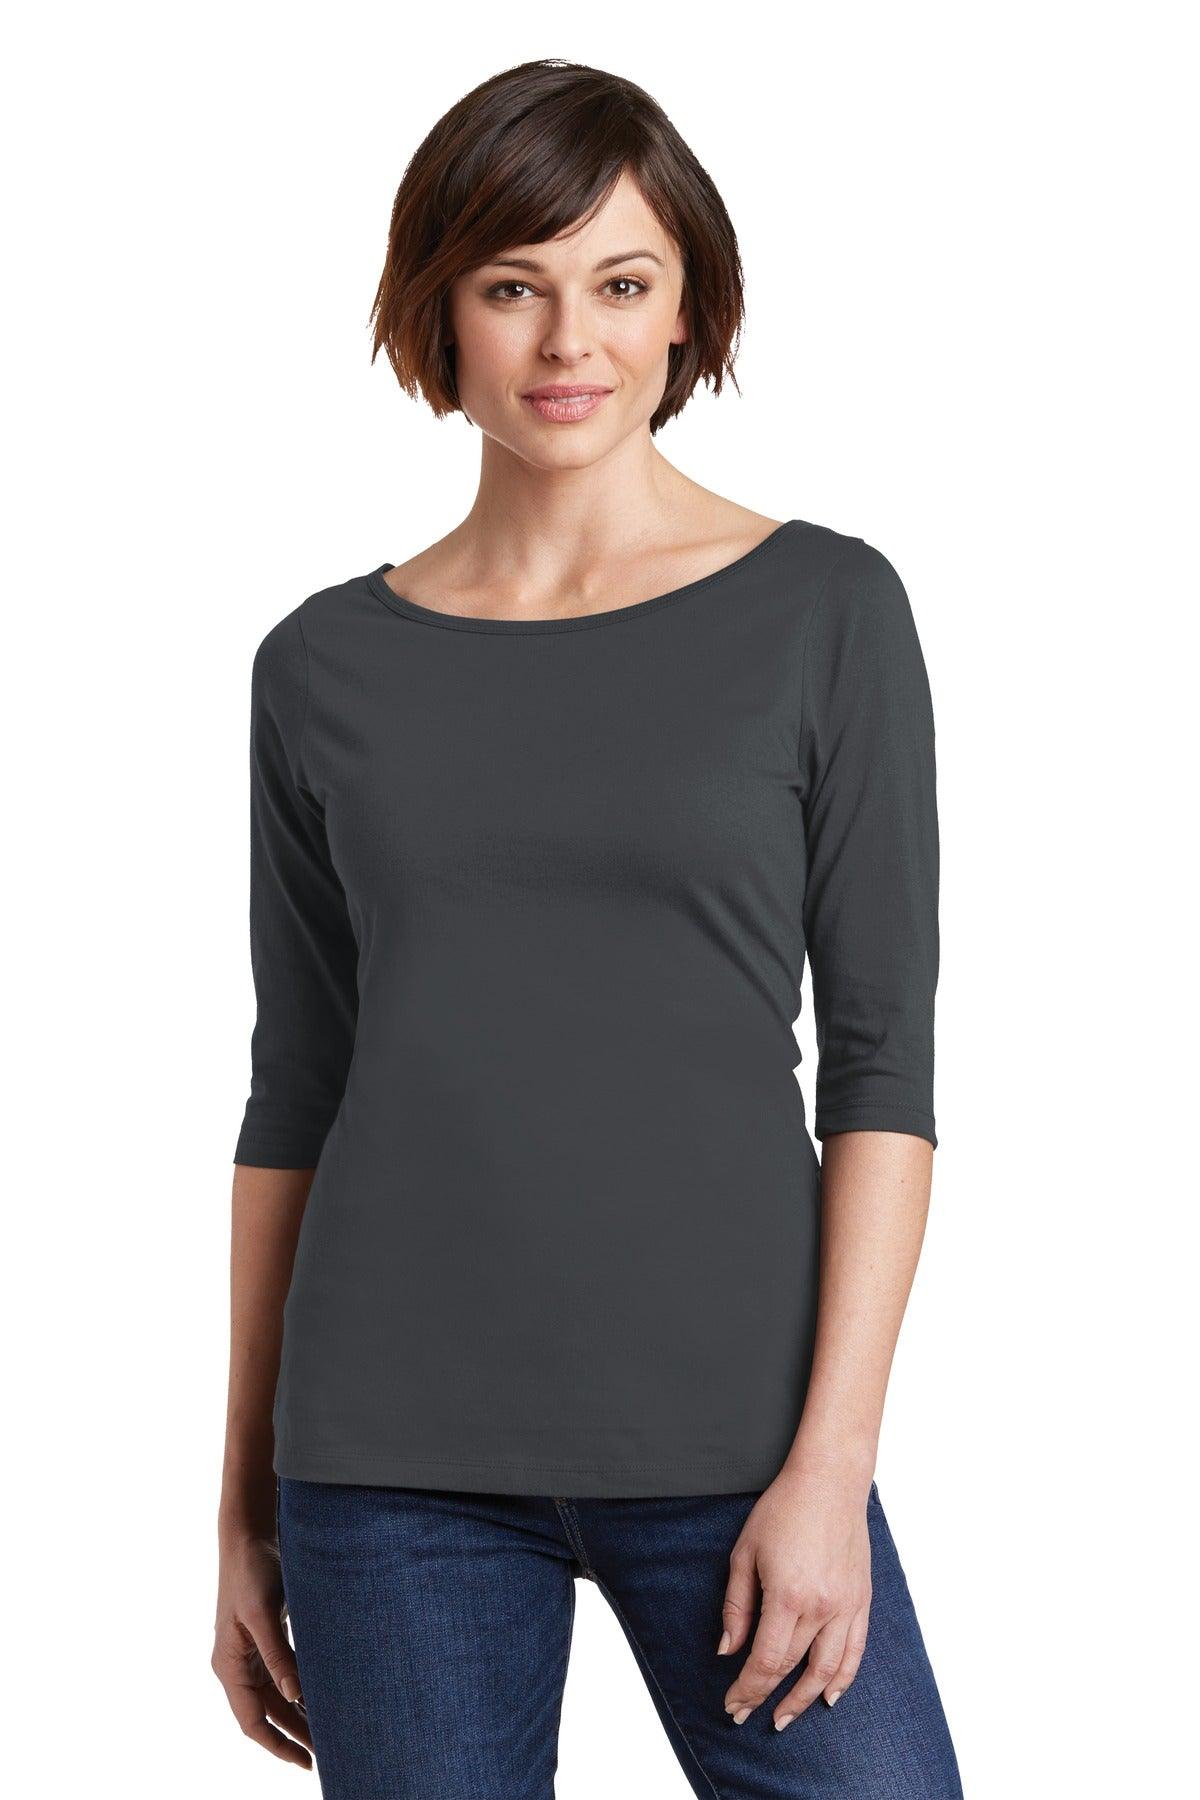 District Women's Perfect Weight 3/4-Sleeve Tee. DM107L - Dresses Max